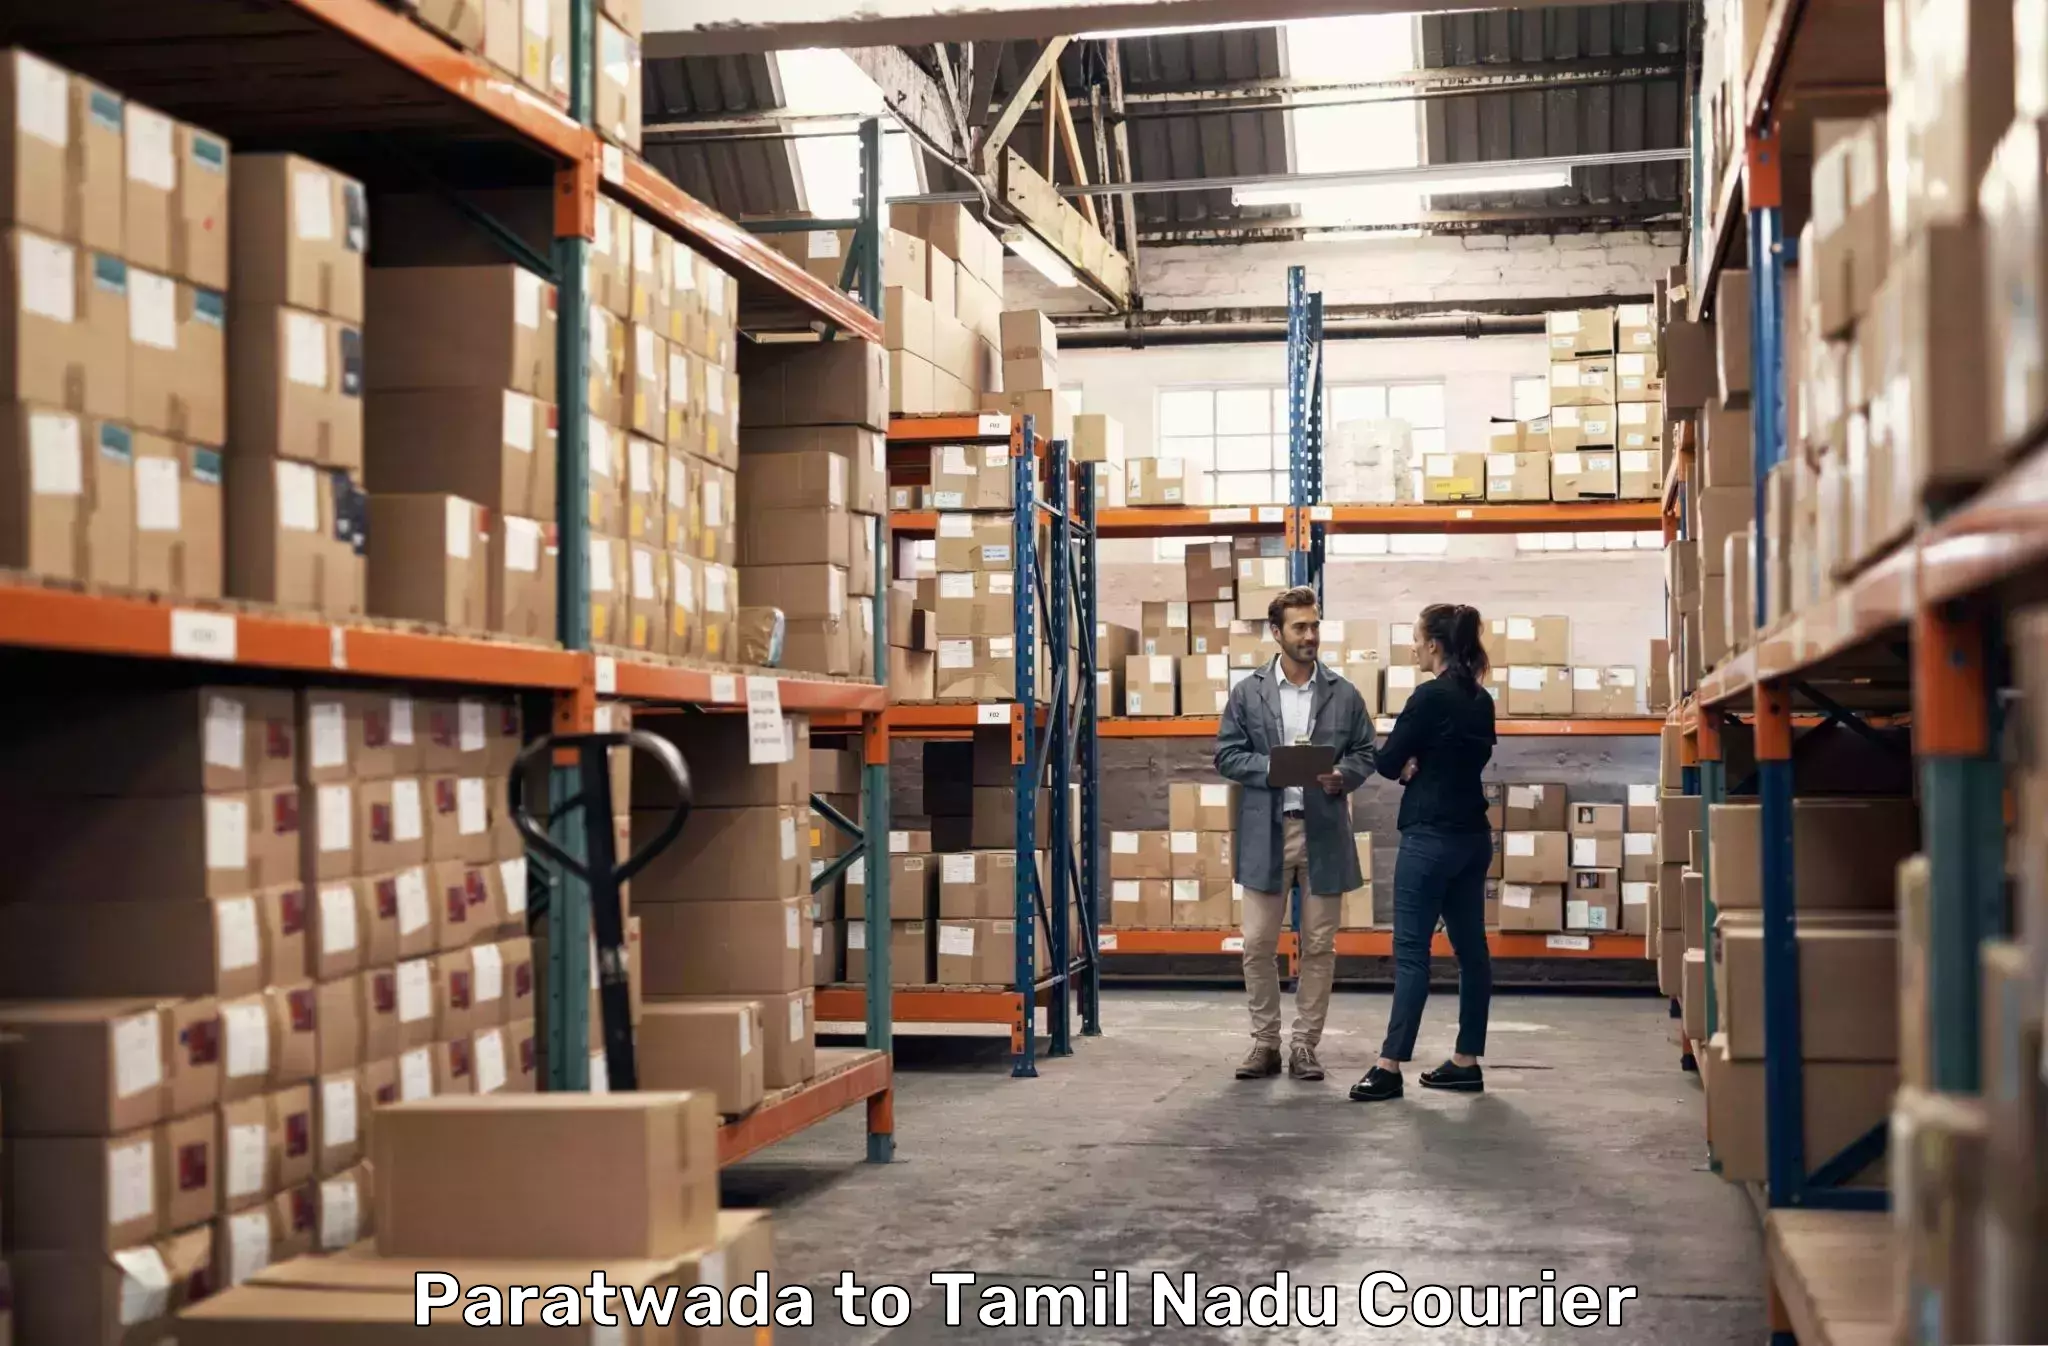 Reliable freight solutions Paratwada to Muthukulathur